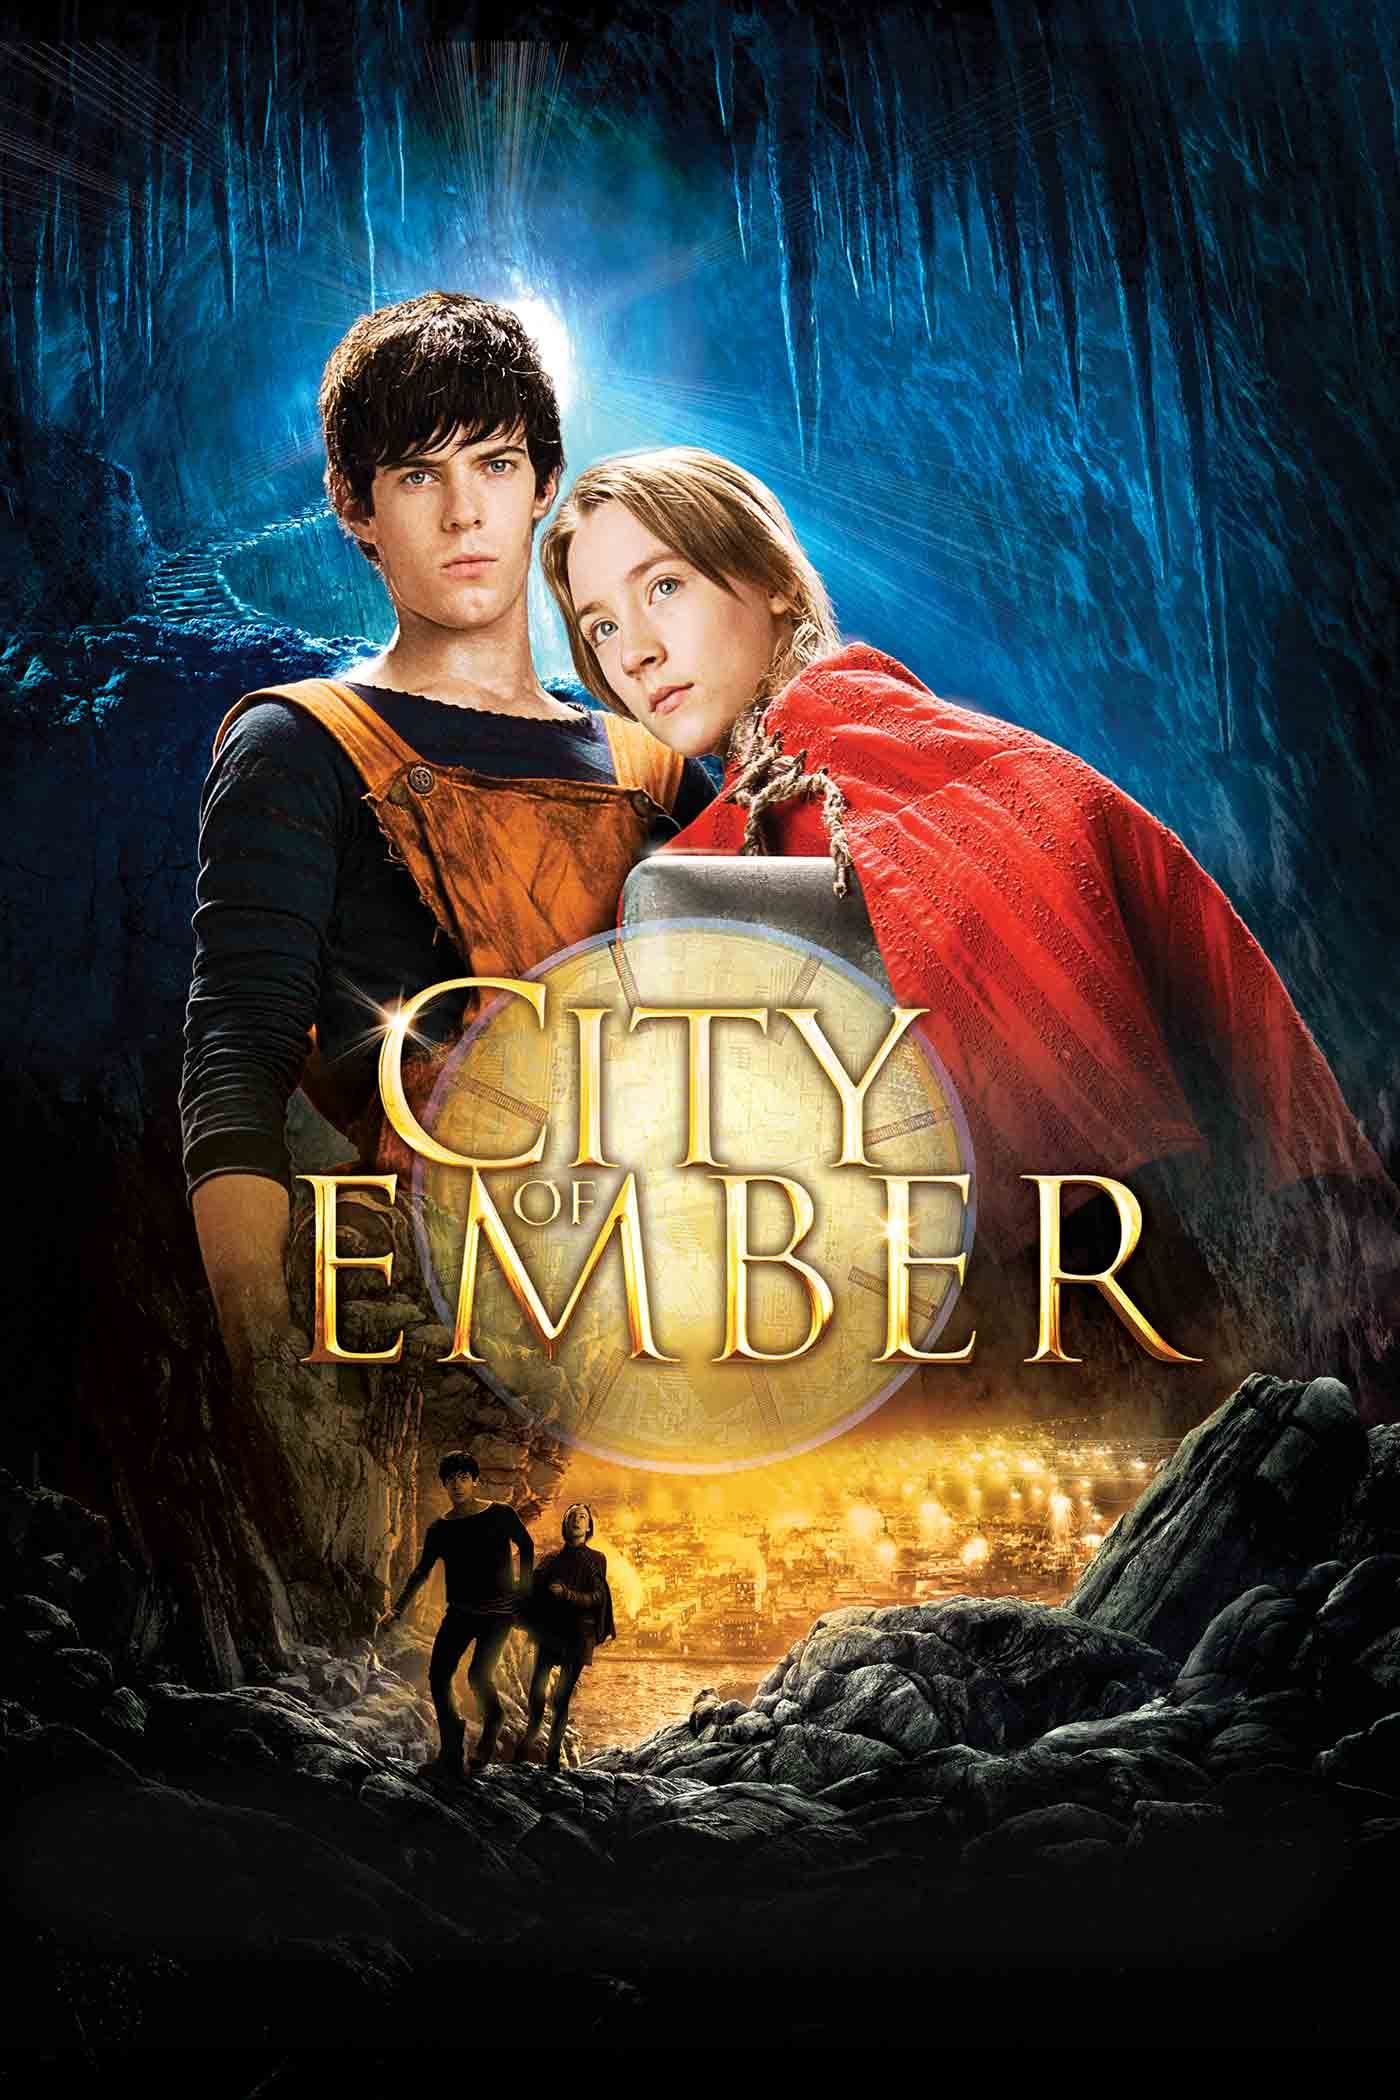 the city of ember series